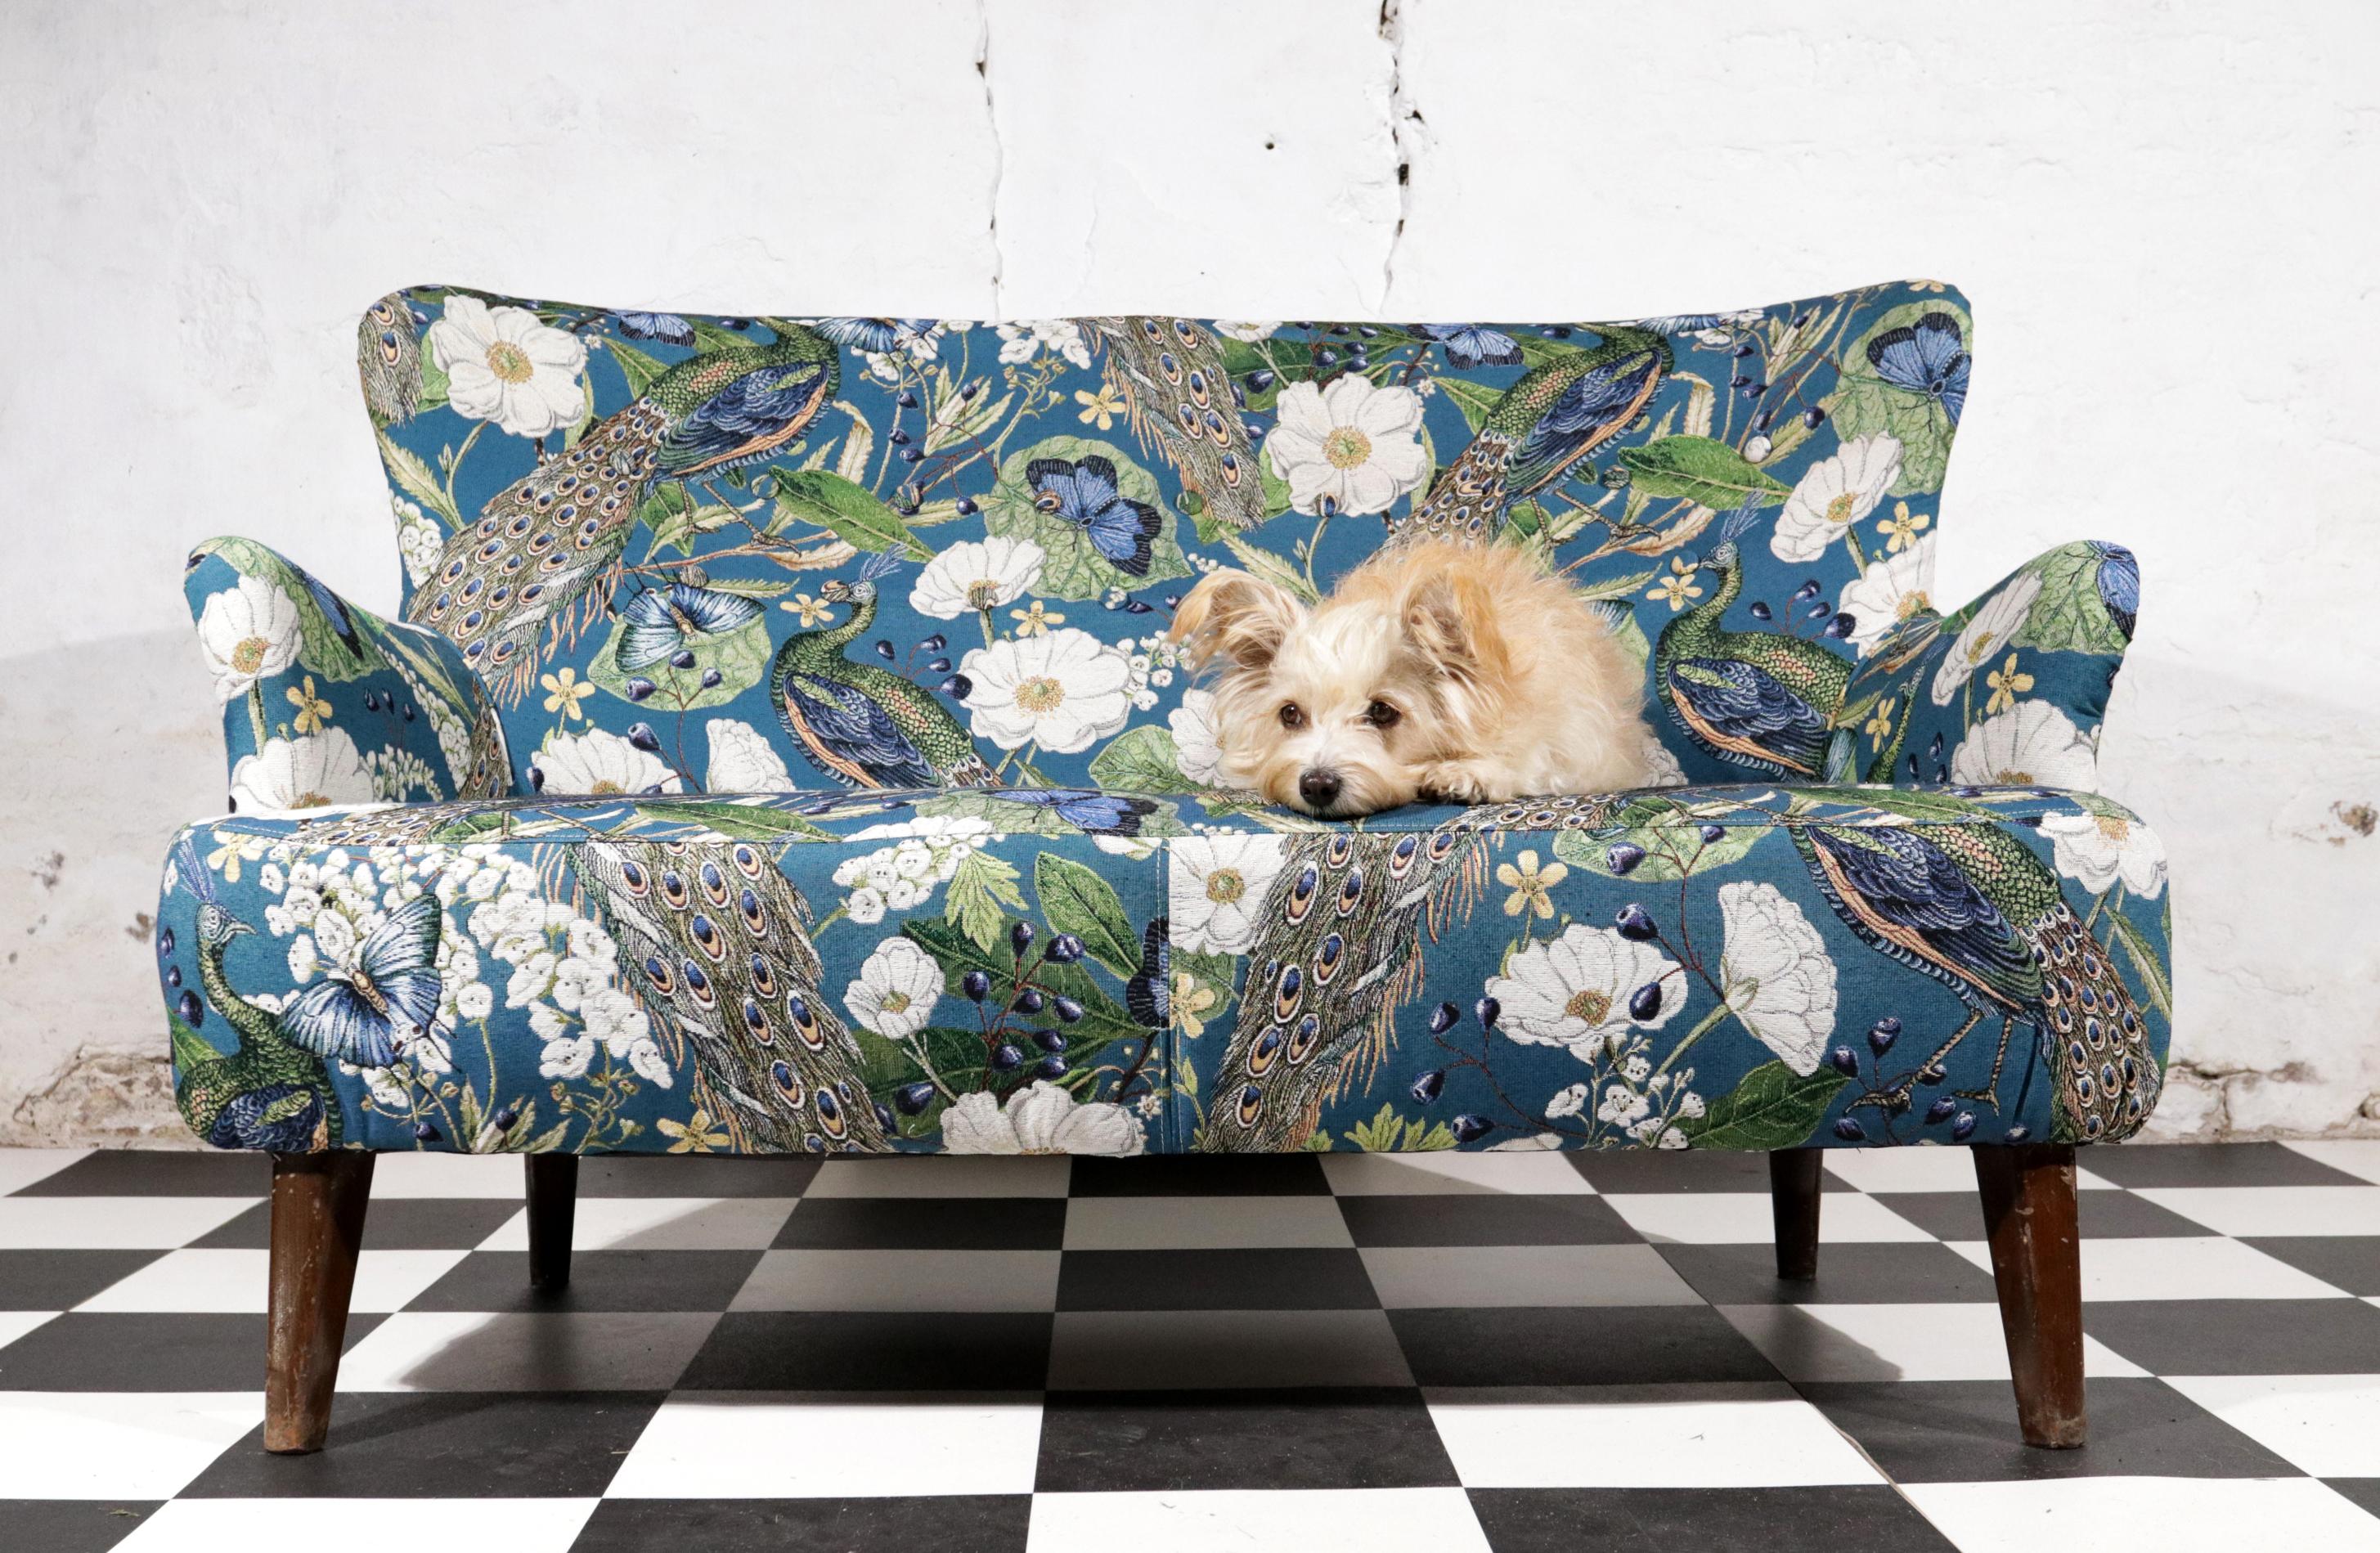 Loveseat designed by Theo Ruth for Artifort in the 1950's.
Reupholstered with a beautiful fine woven gobelin fabric with peacocks, butterflies and flowers.

Dutch designer Theo Ruth was born in 1915 in Maastricht. He trained as a furniture designer